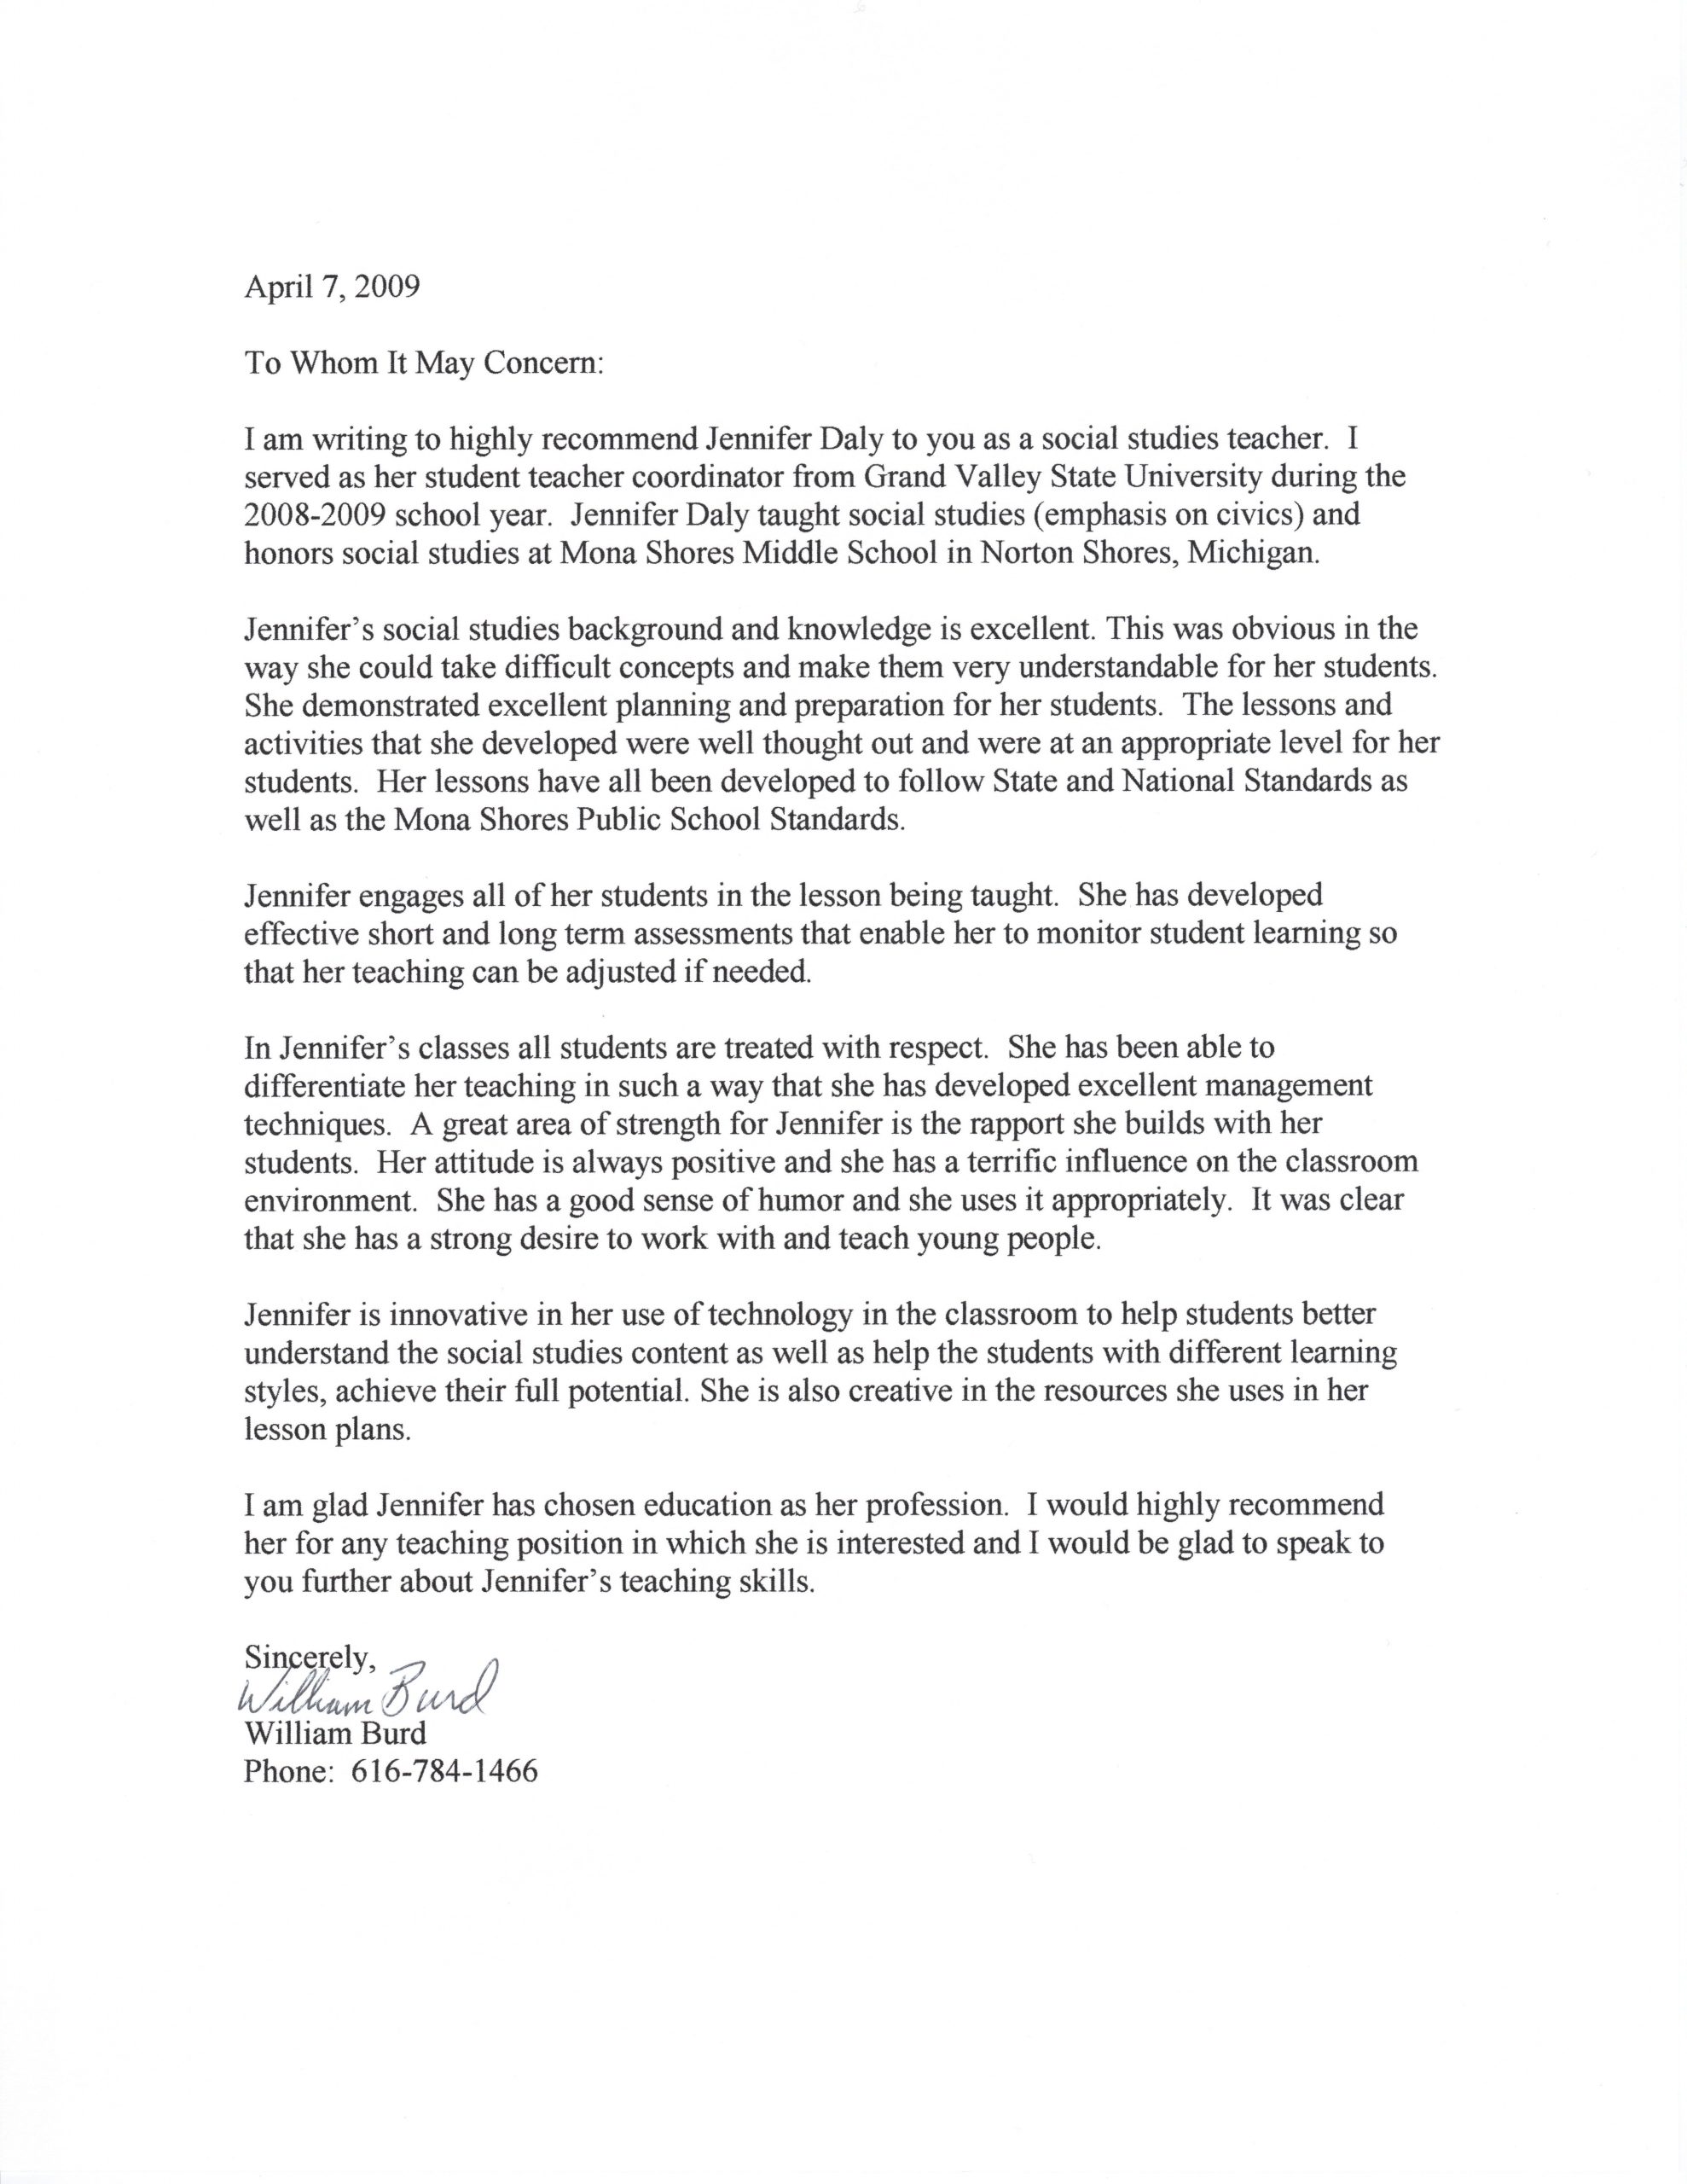 Student Teacher Recommendation Letter Examples Letter Of inside sizing 5100 X 6600